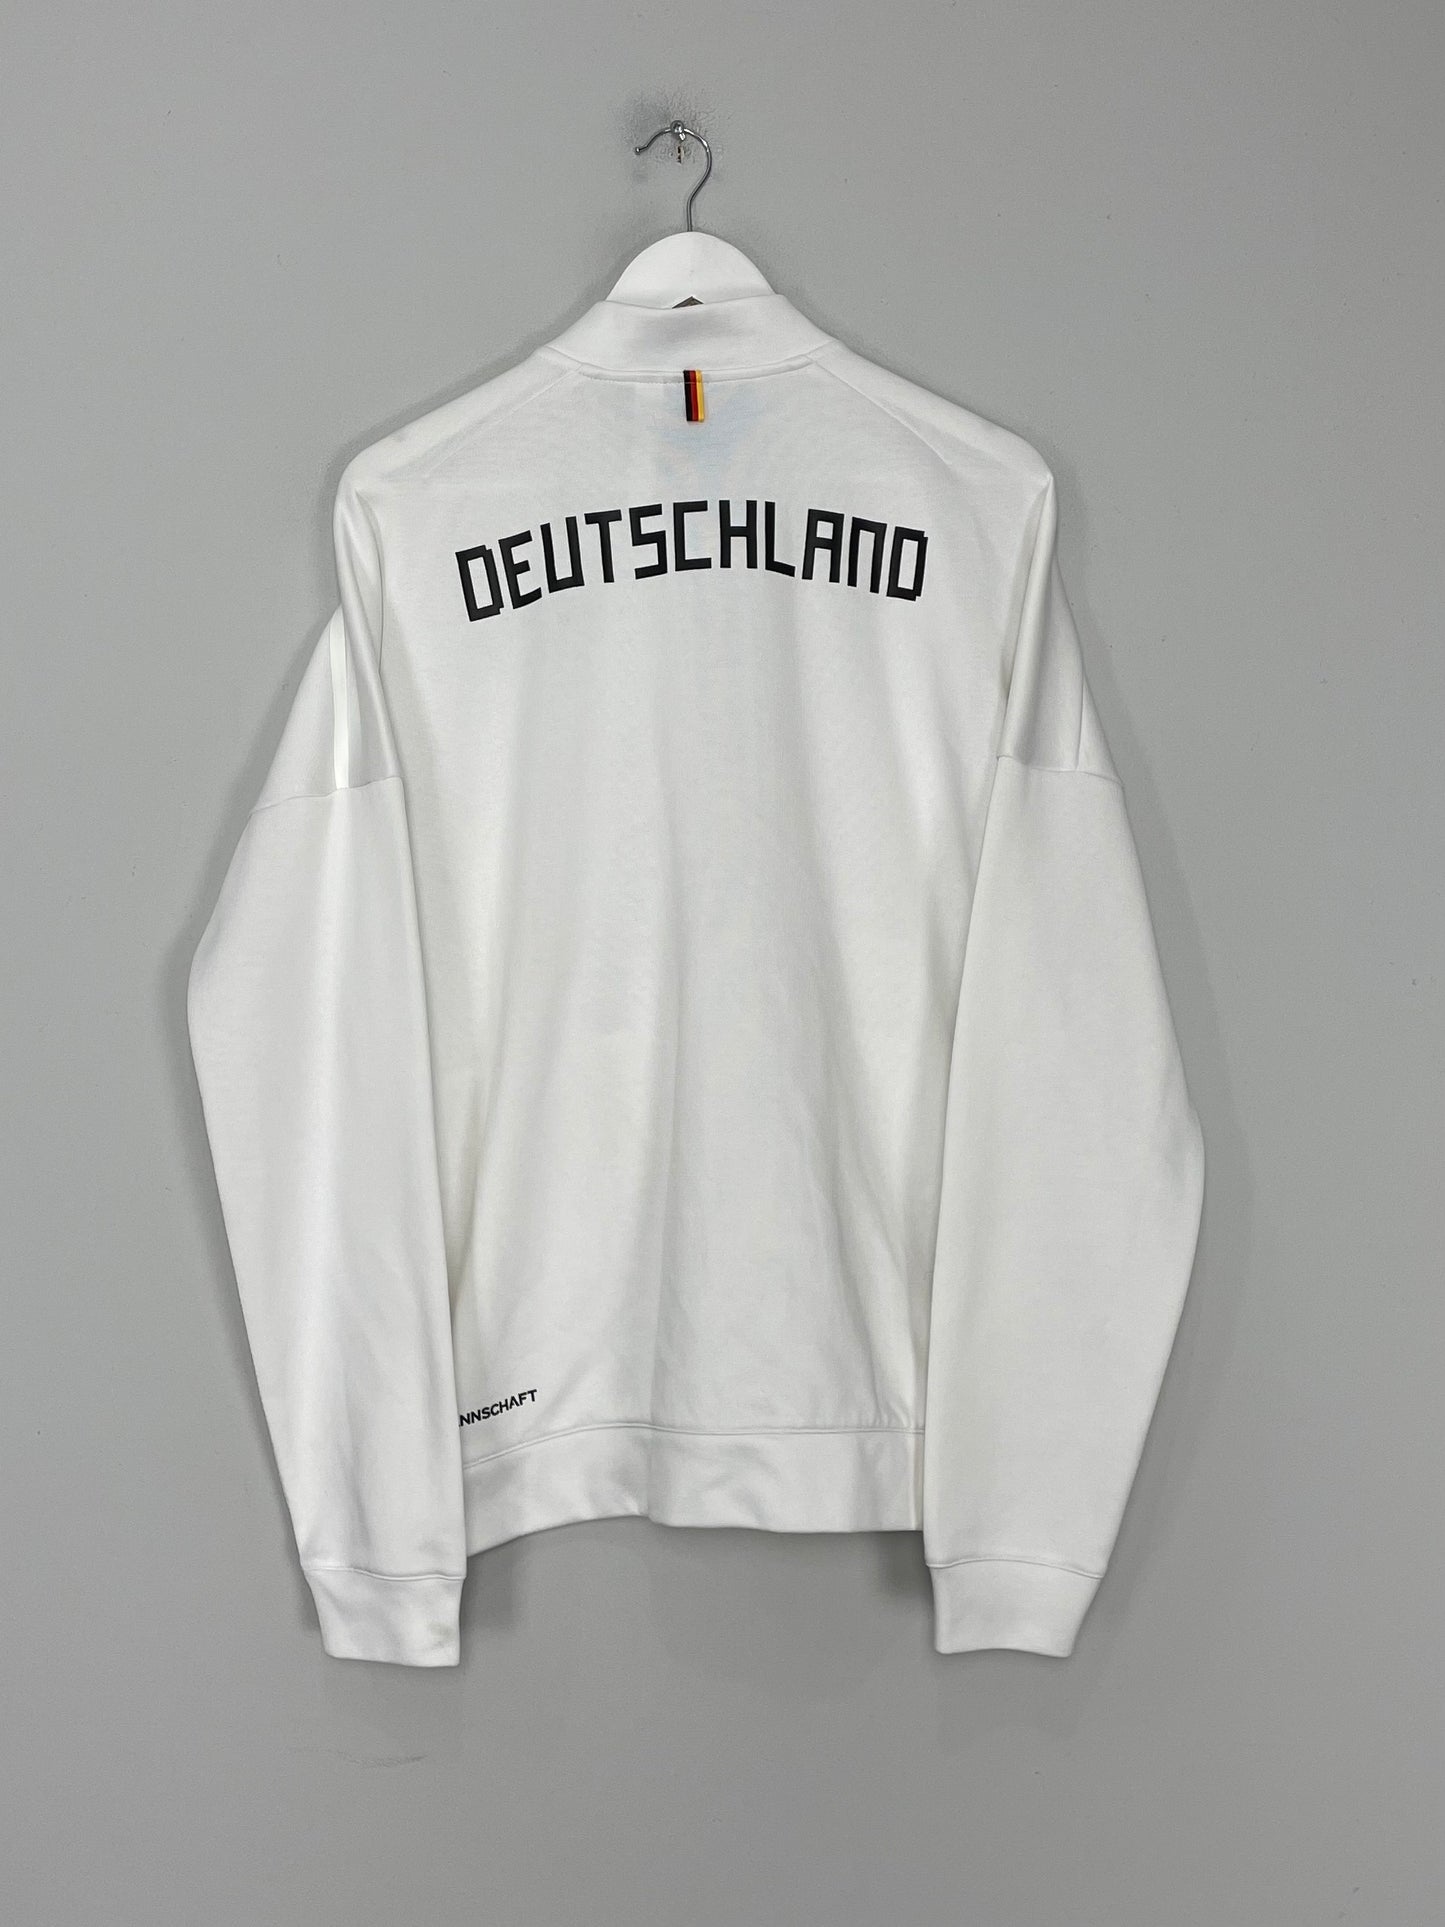 2018/19 GERMANY TRACKSUIT TOP (M) ADIDAS